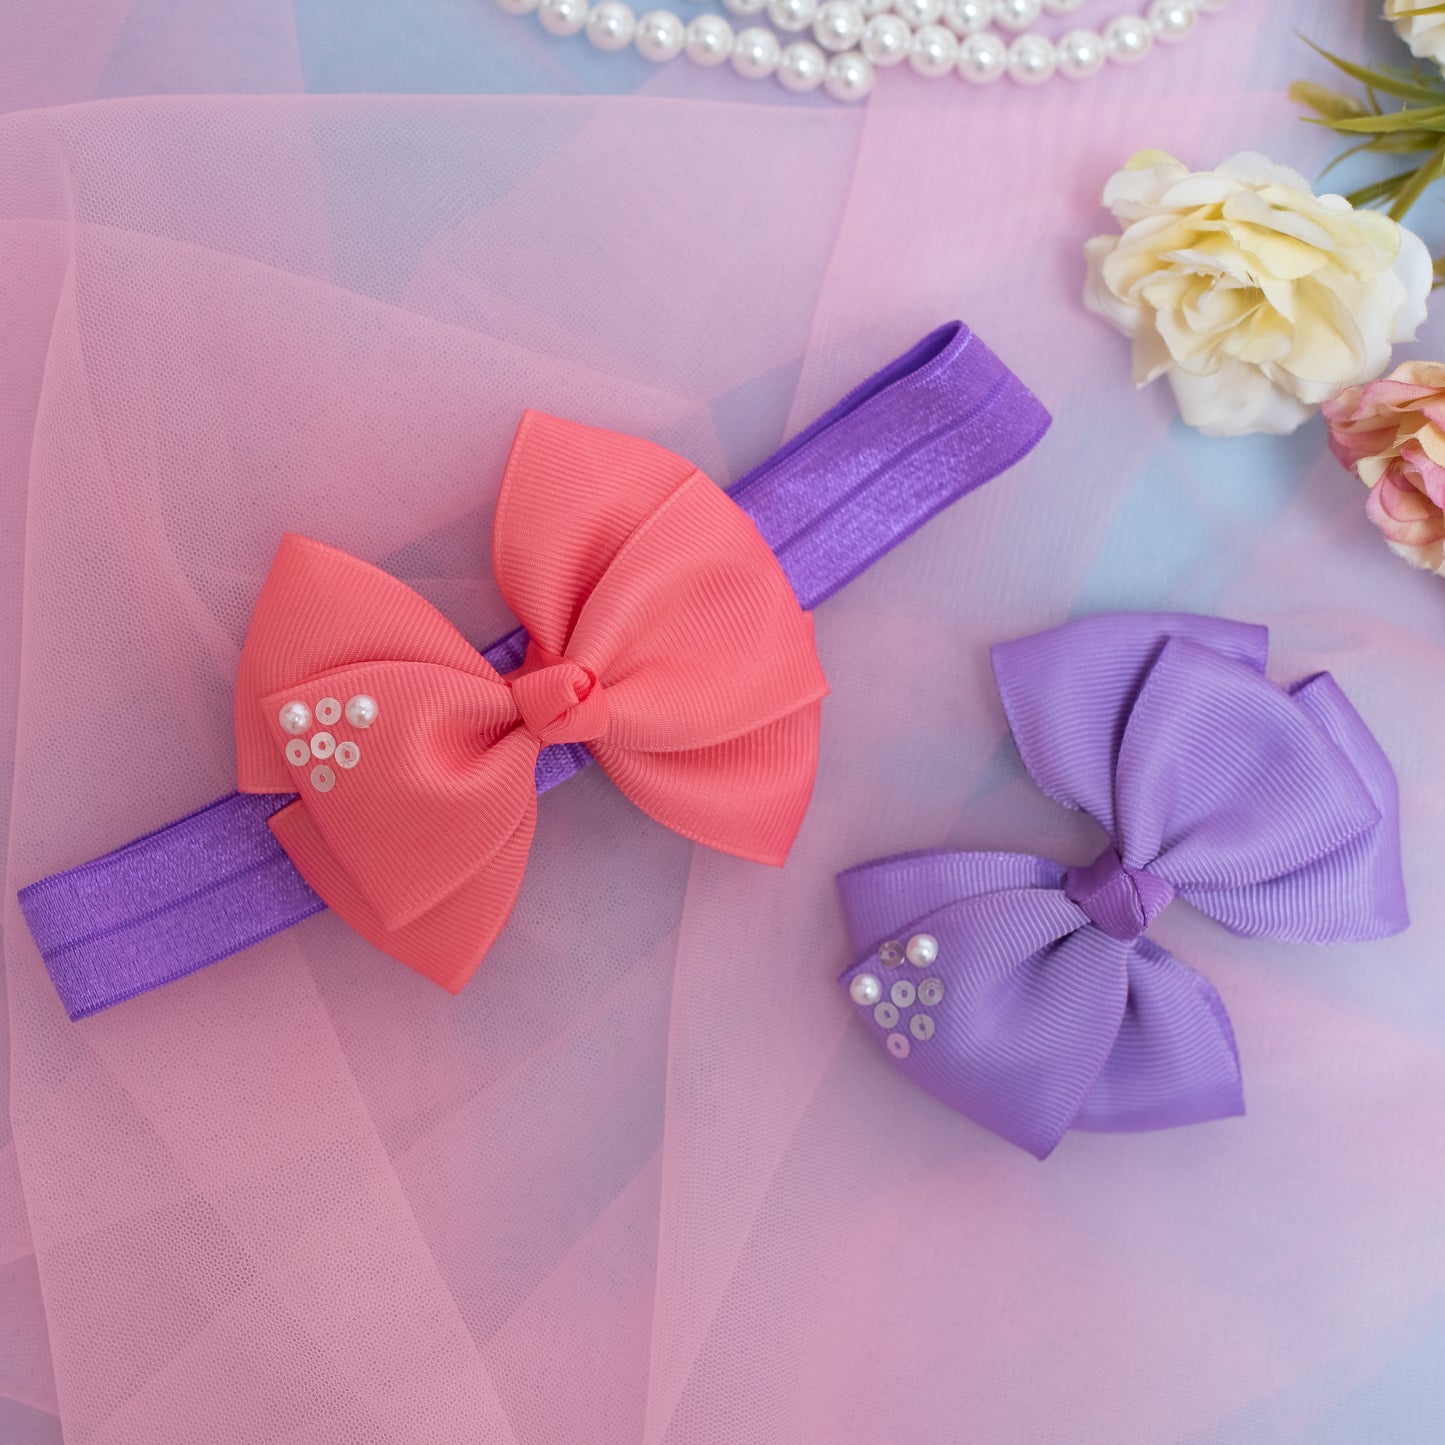 Combo: 1 Stretchy Band with 2 Layered Bows embellished with Sequinze and Pearls - Peach, Purple